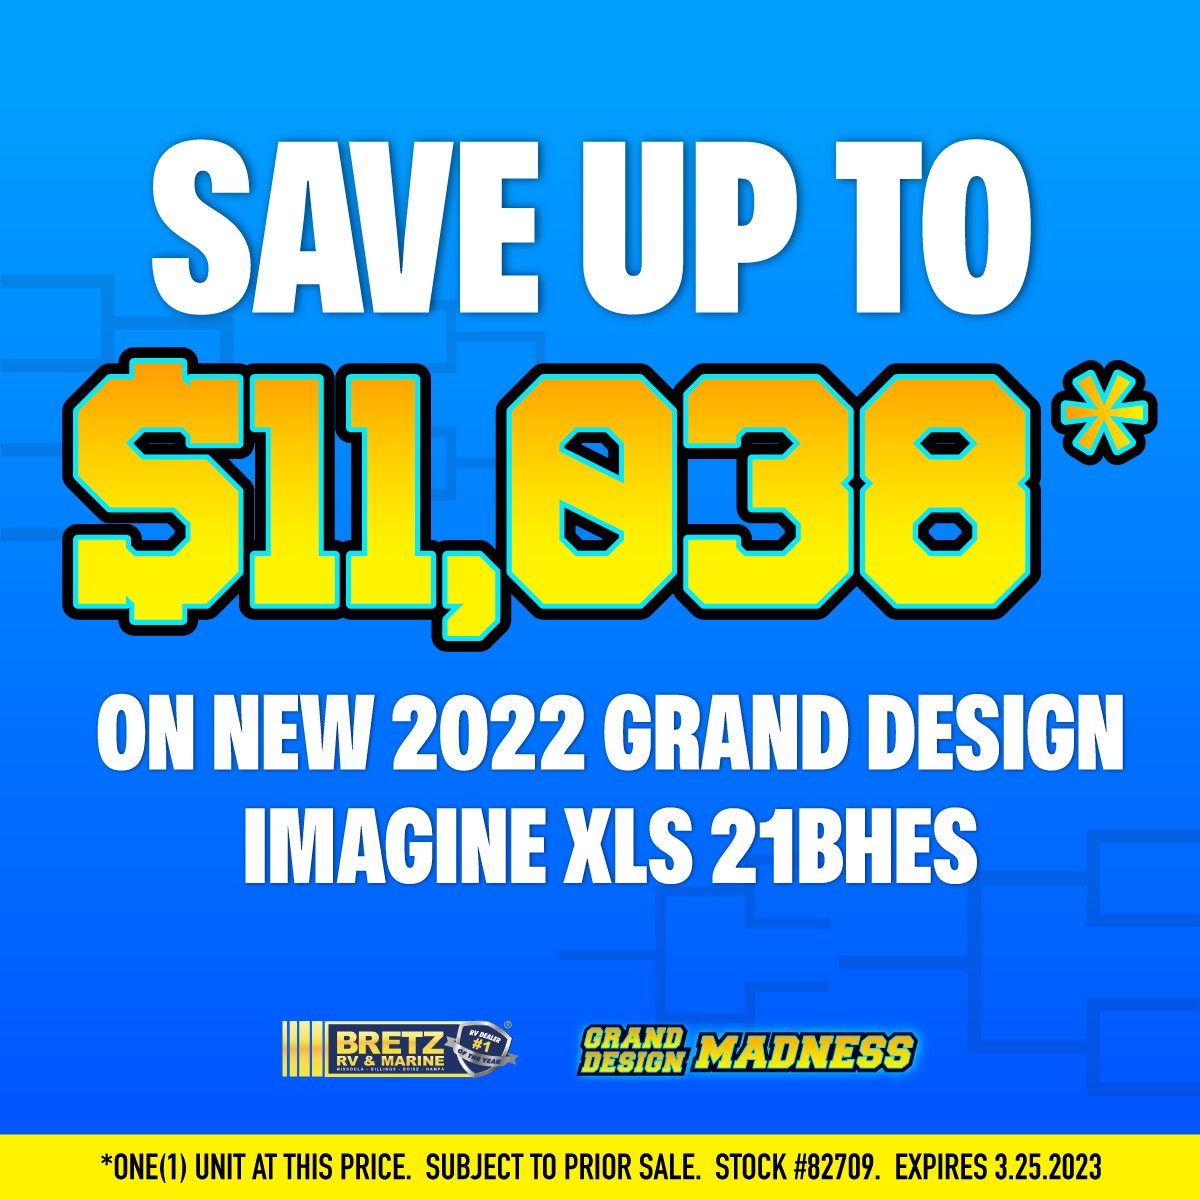 Save up to $11,038 on New 2022 Grand Design Imagine XLS 21BHEs